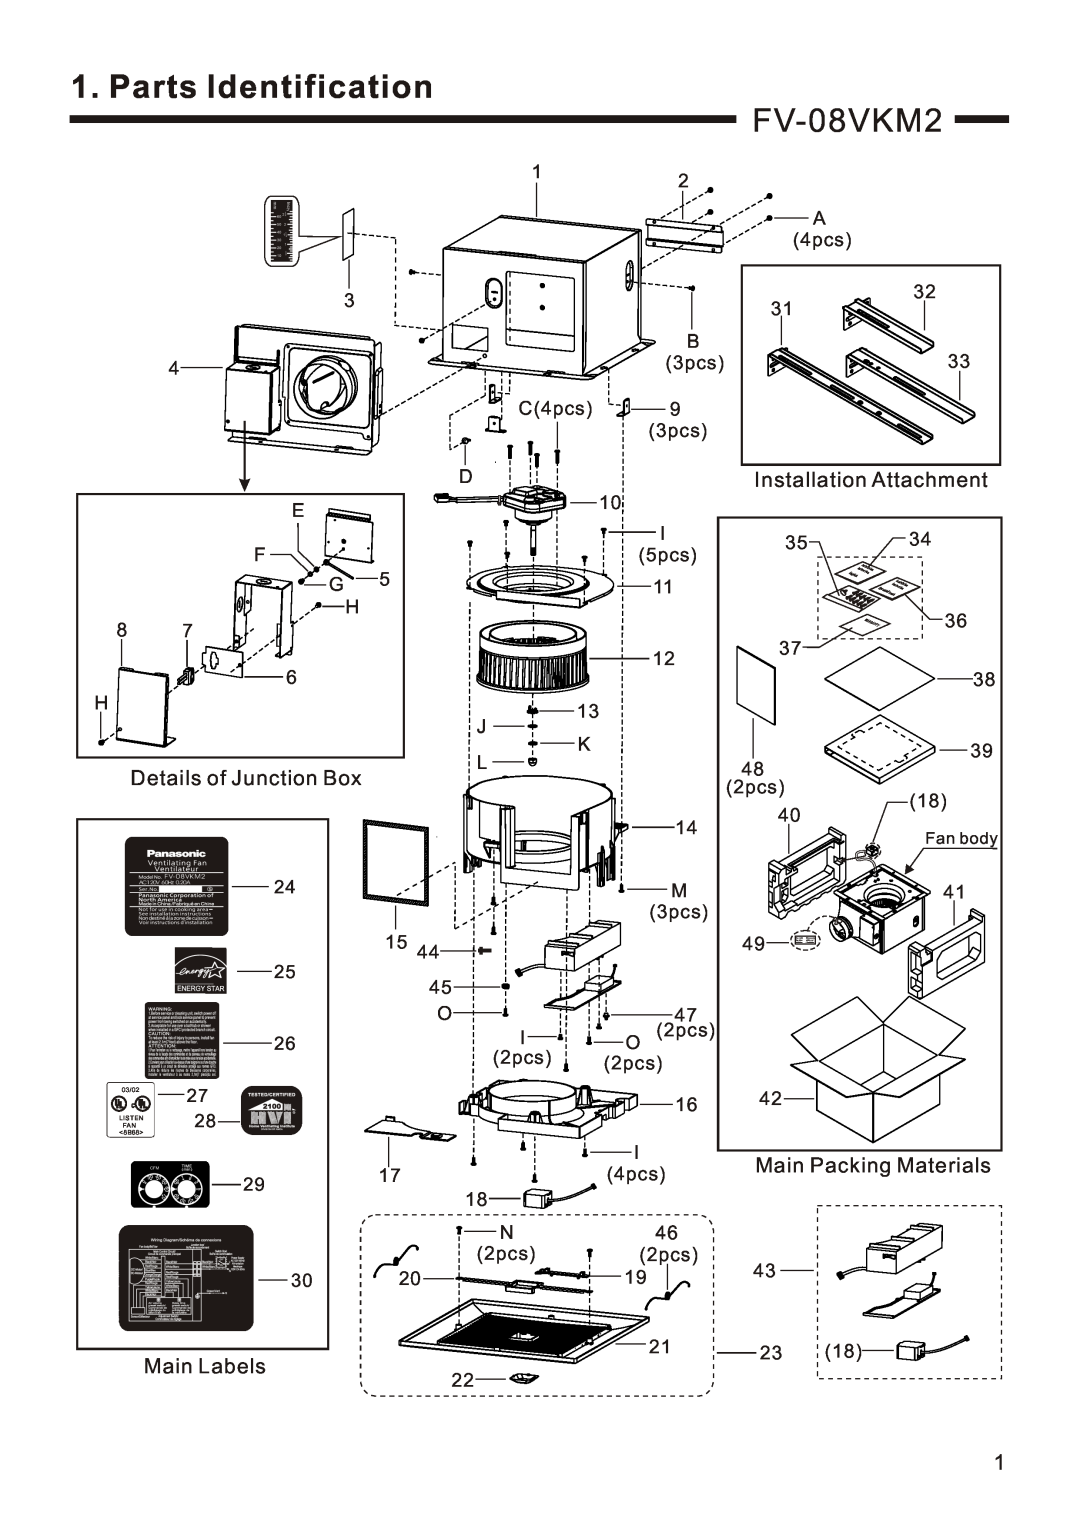 Panasonic FV-08VKM2 Parts Identification, Installation Attachment, Details of Junction Box, Main Packing Materials, 4pcs 